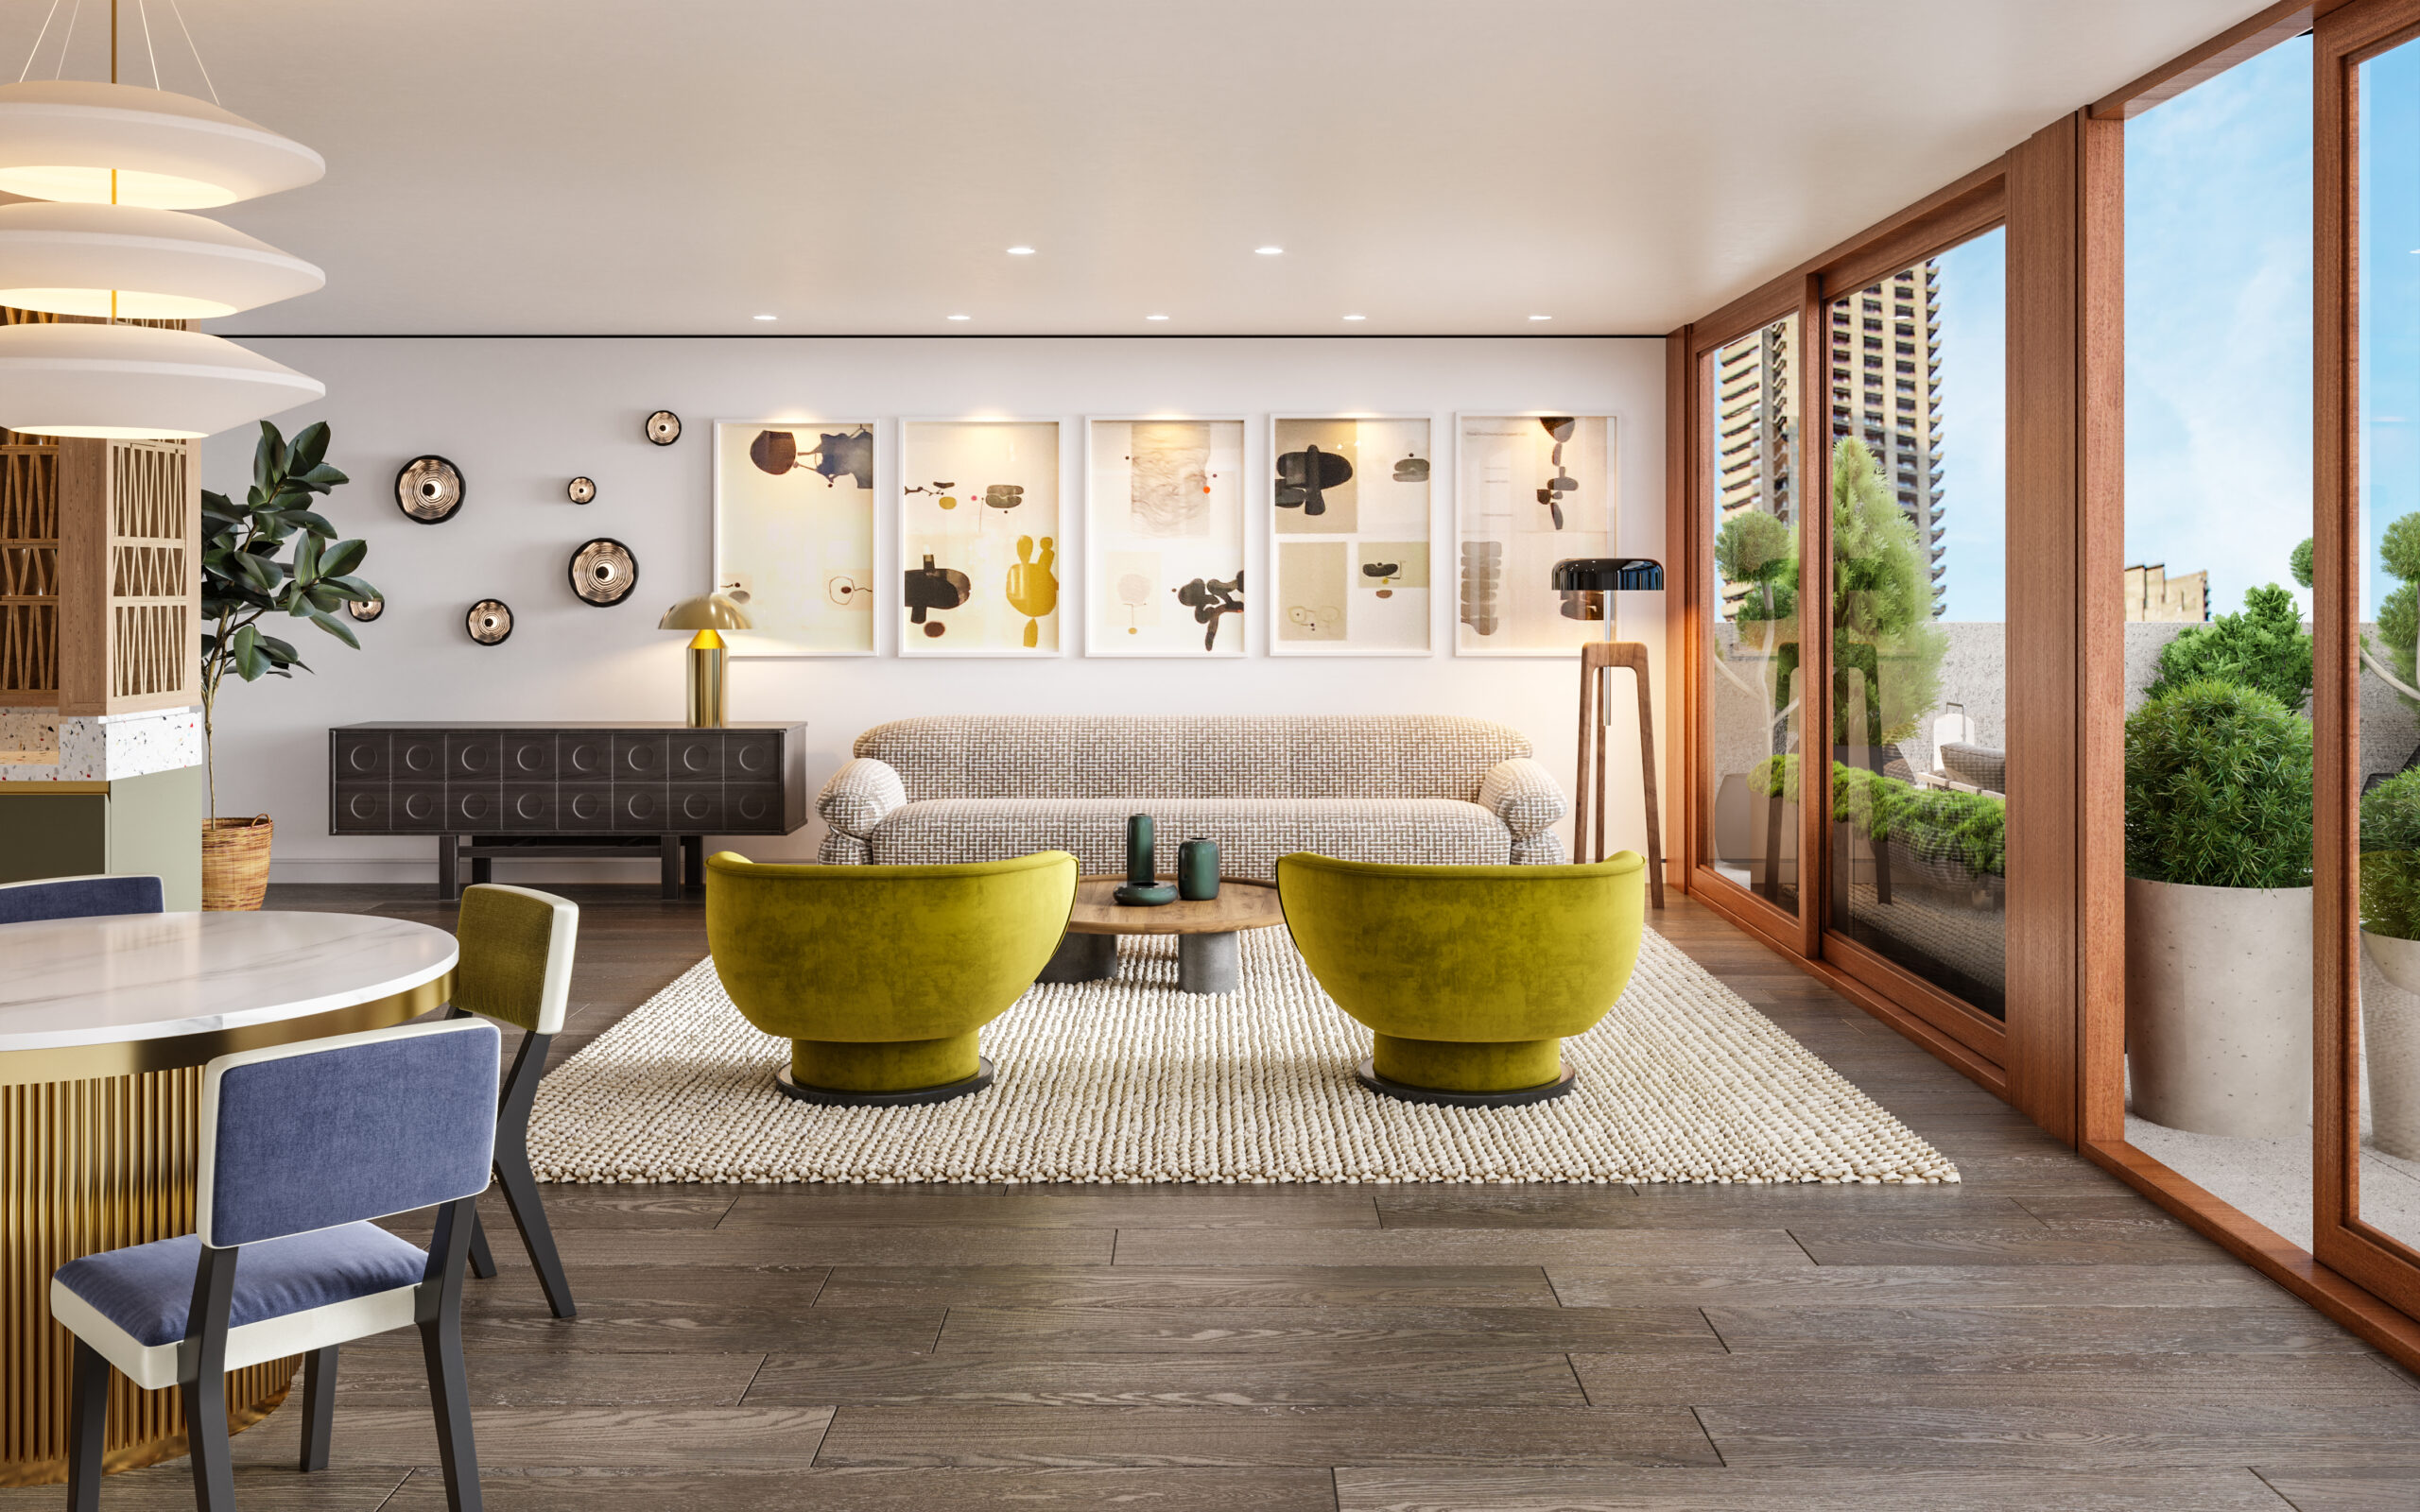 Barbican open living room kitchen with mid century furniture and terrace beyond - City Pied a Terre - LLI Design